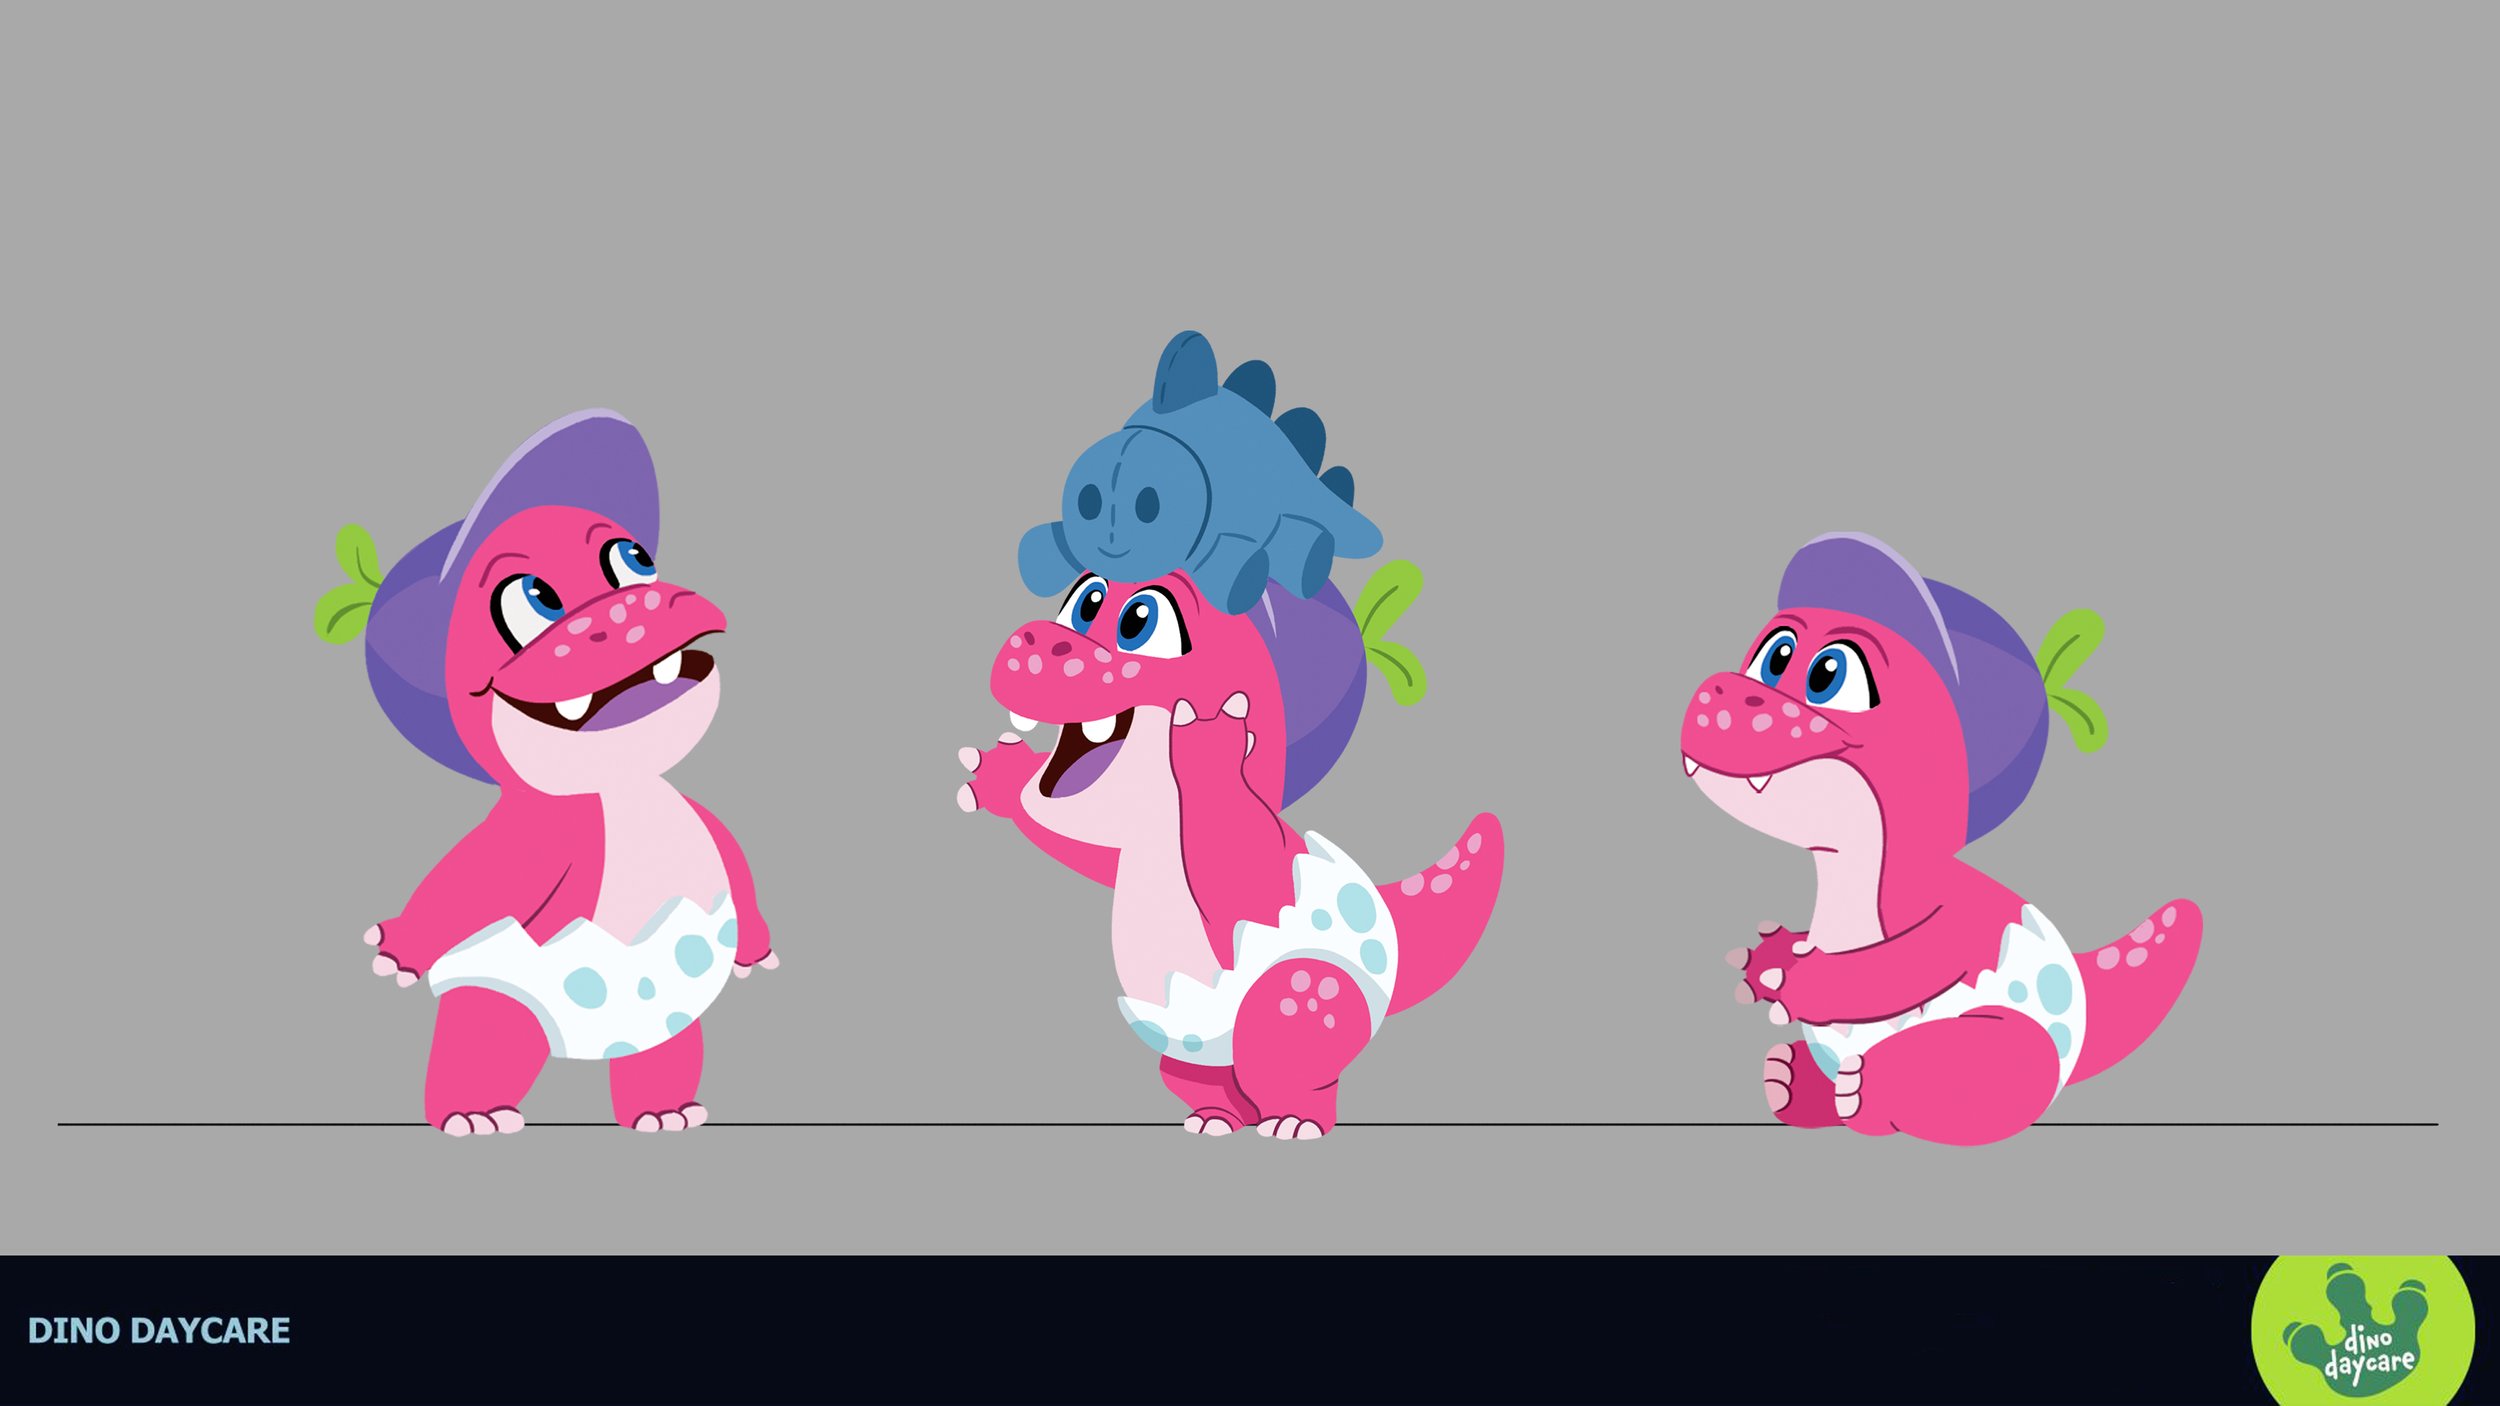 DINODAYCARE_character sheets 5.jpg